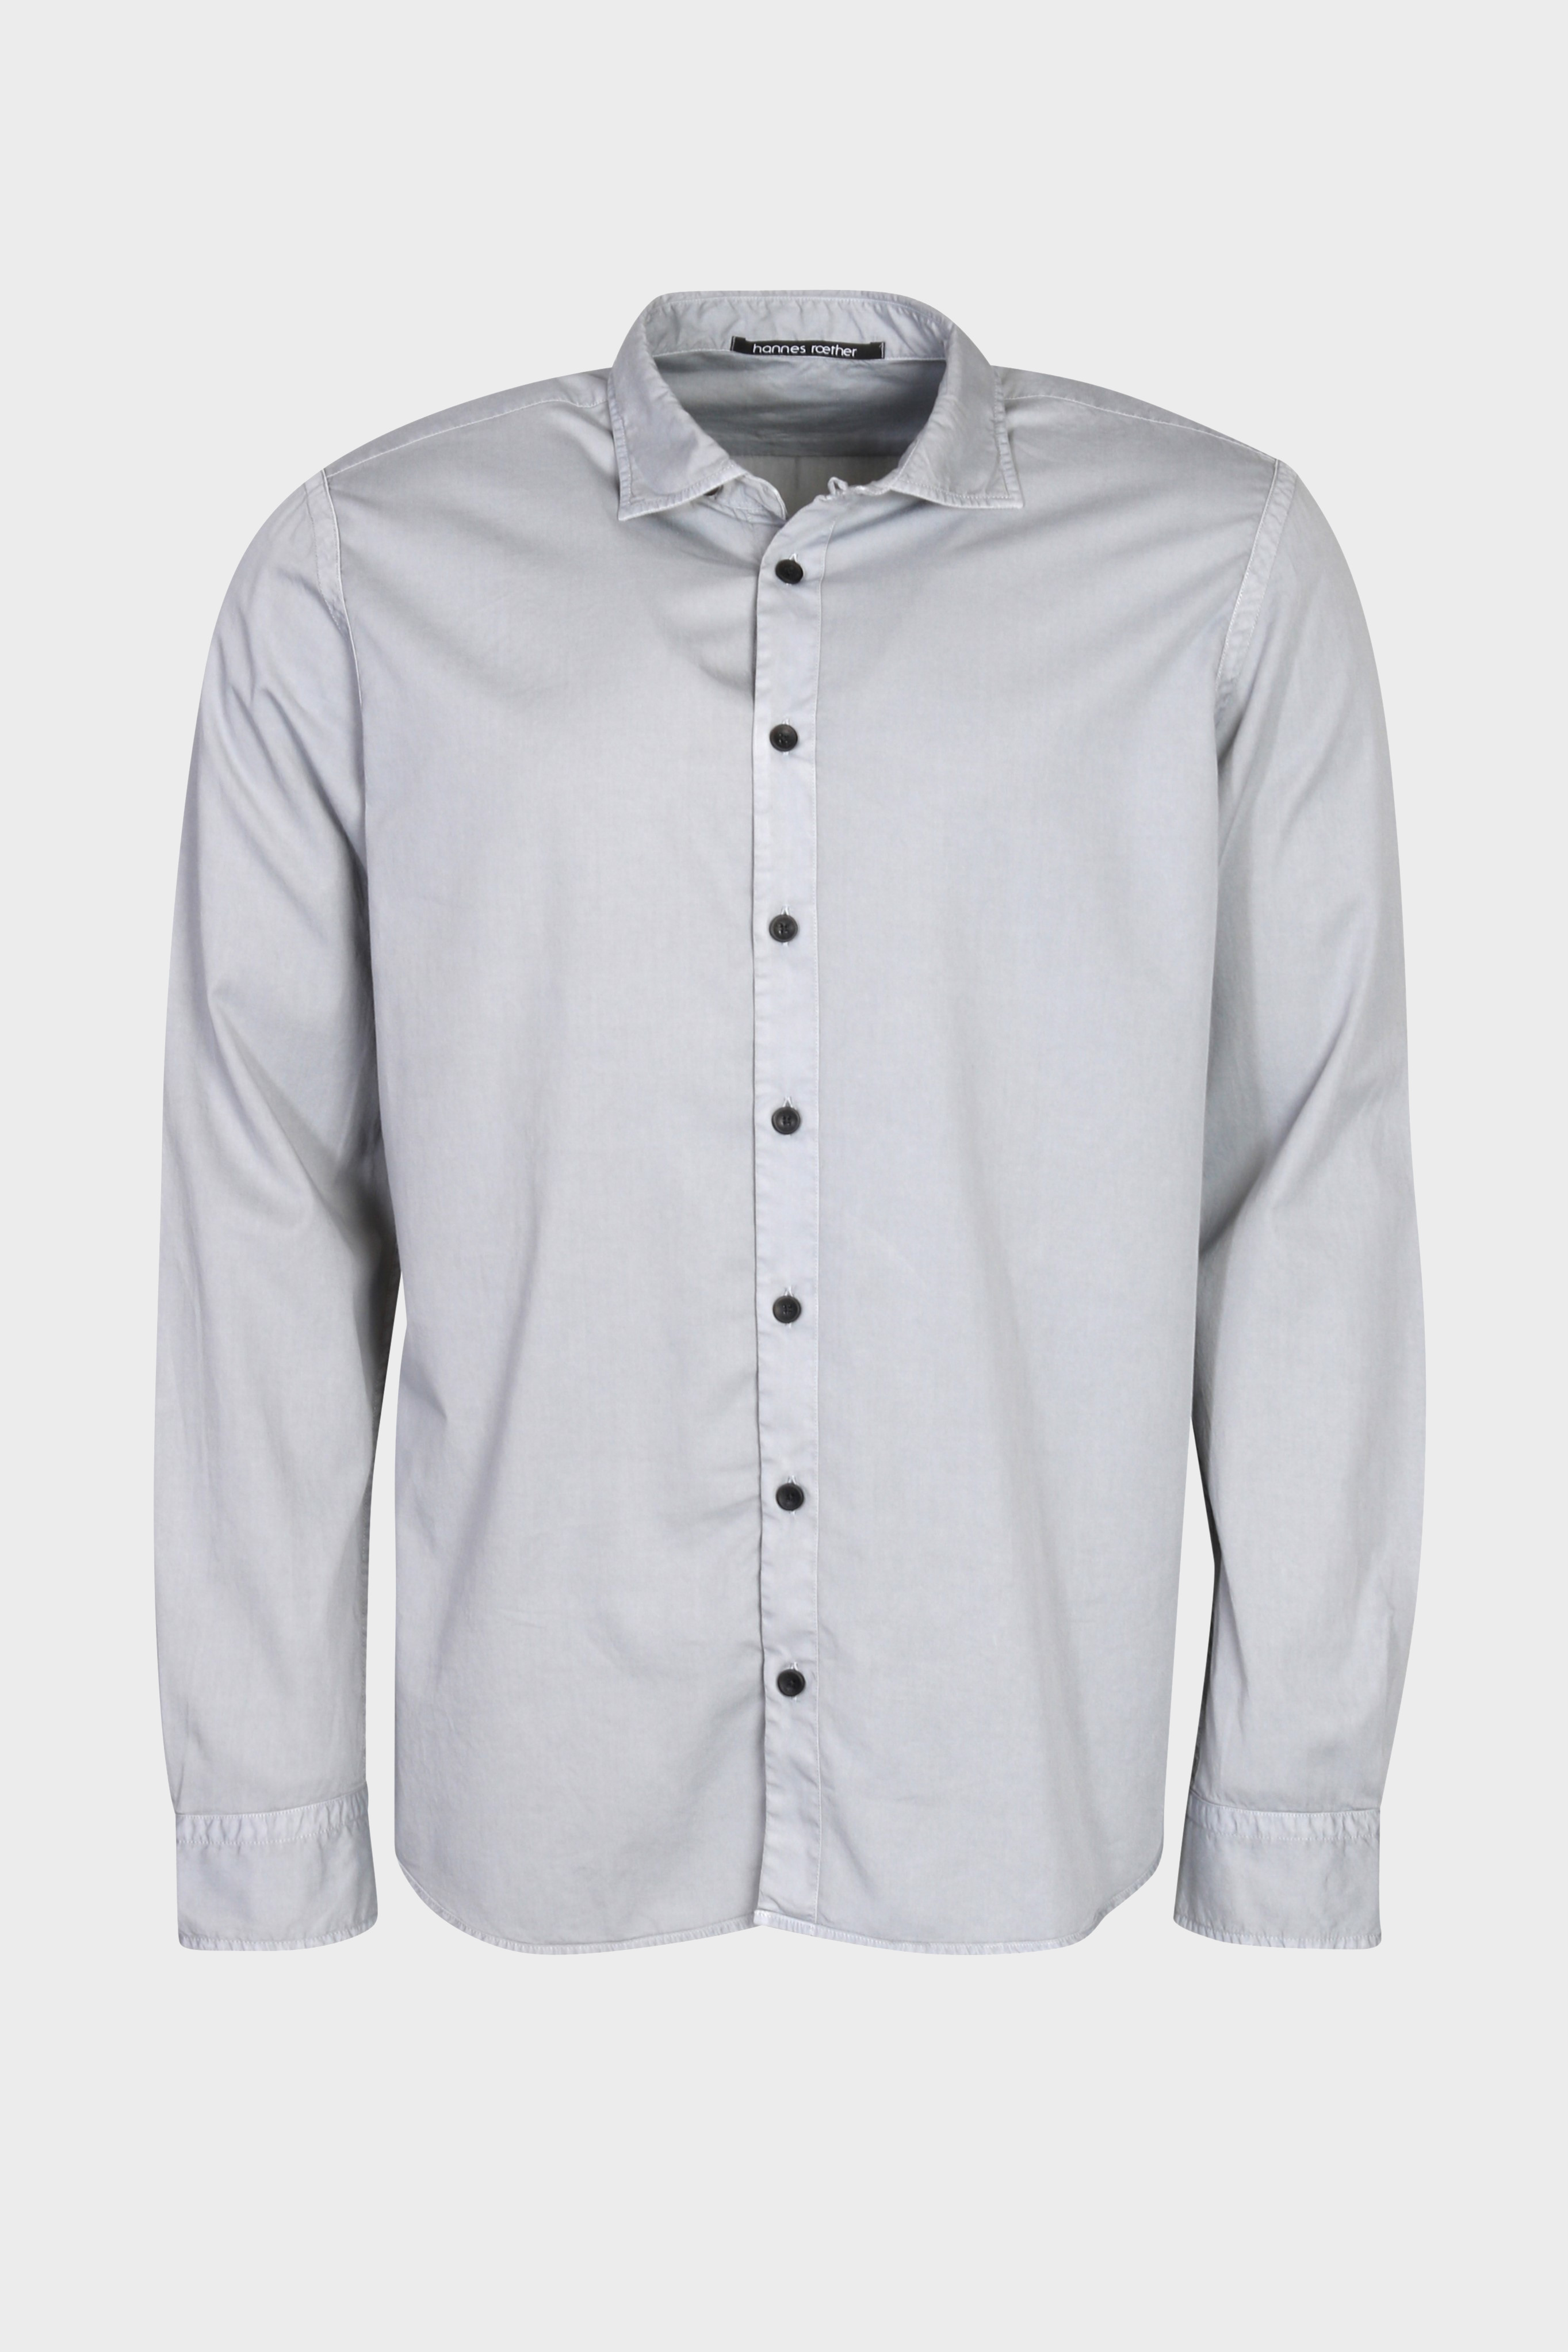 HANNES ROETHER Cotton Shirt in Light Grey